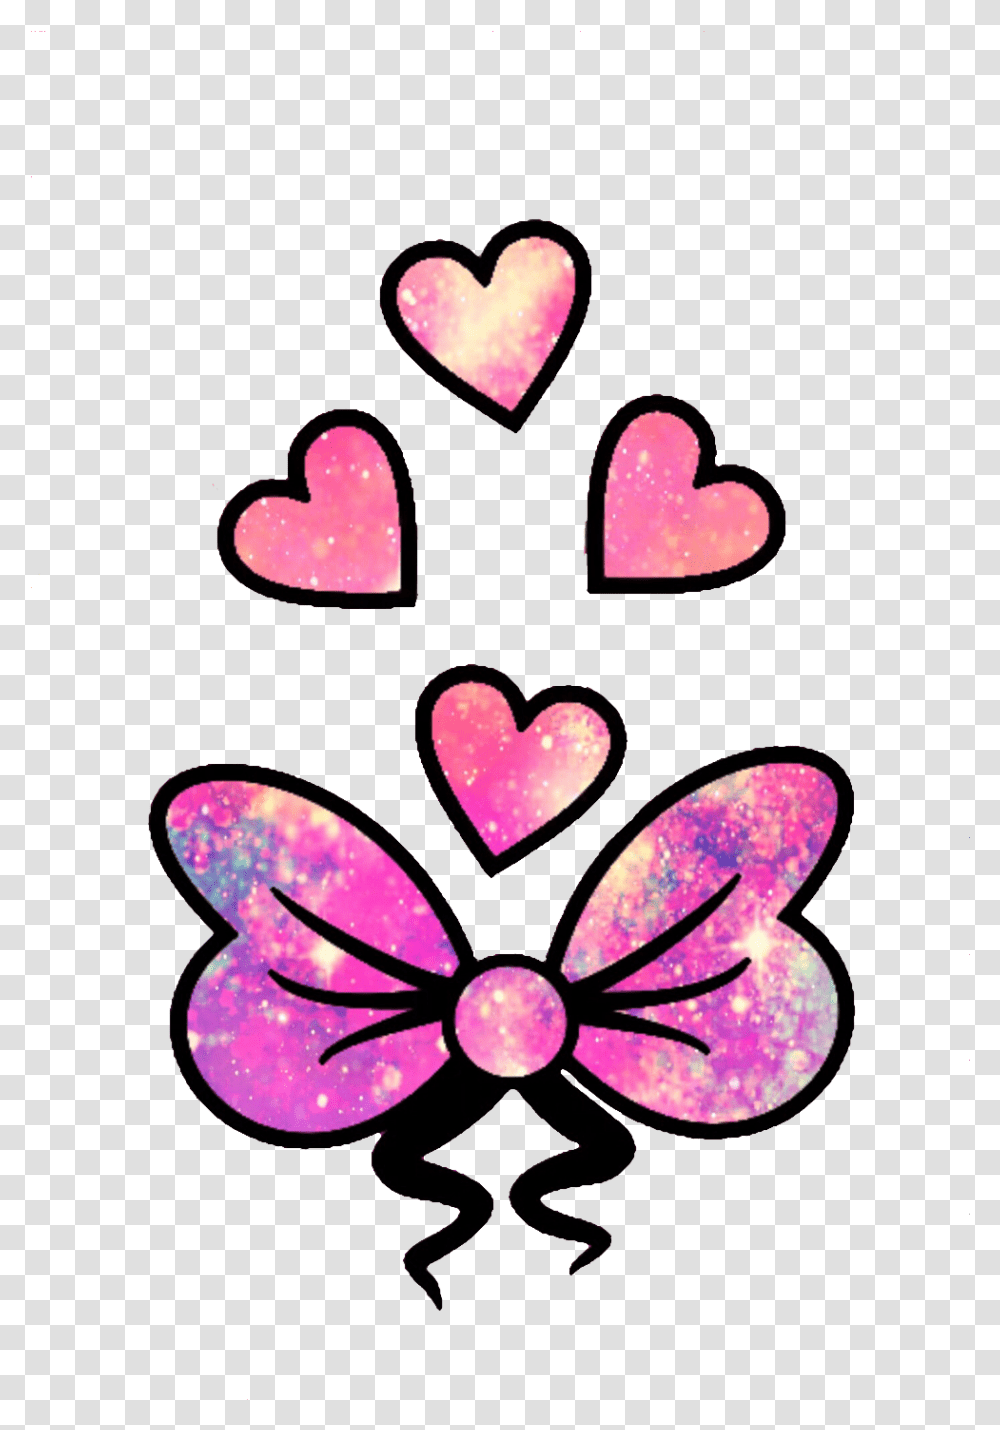 Galaxy Cute Girly Bow Hearts Love Pink Clipart Girly, Ornament, Light, Purple, Graphics Transparent Png